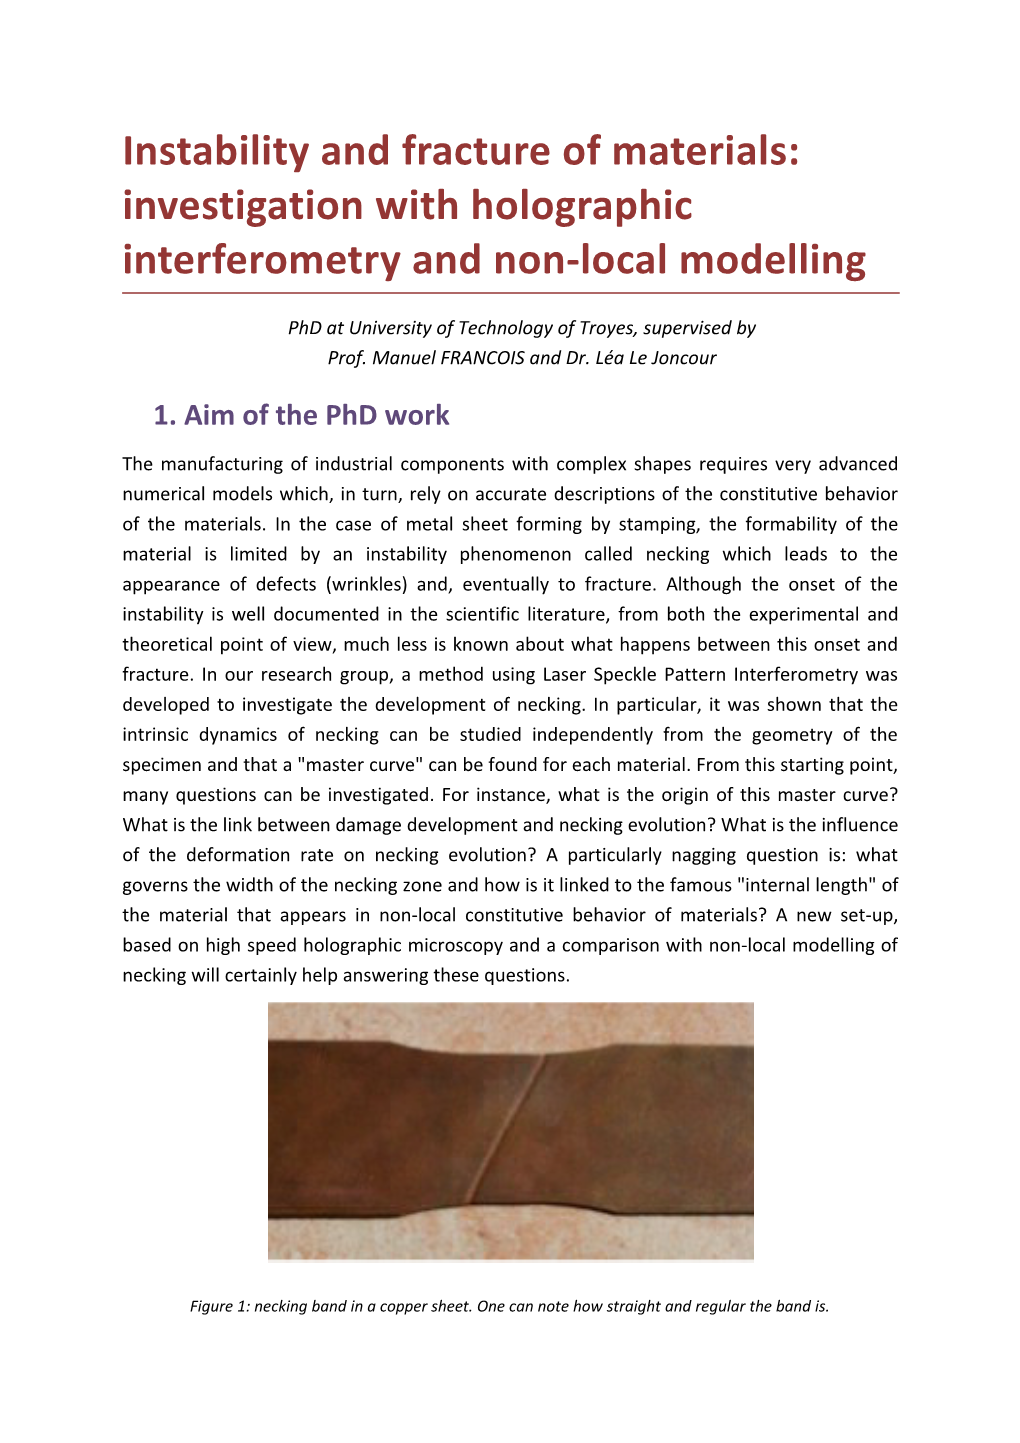 Instability and Fracture of Materials: Investigation with Holographic Interferometry And